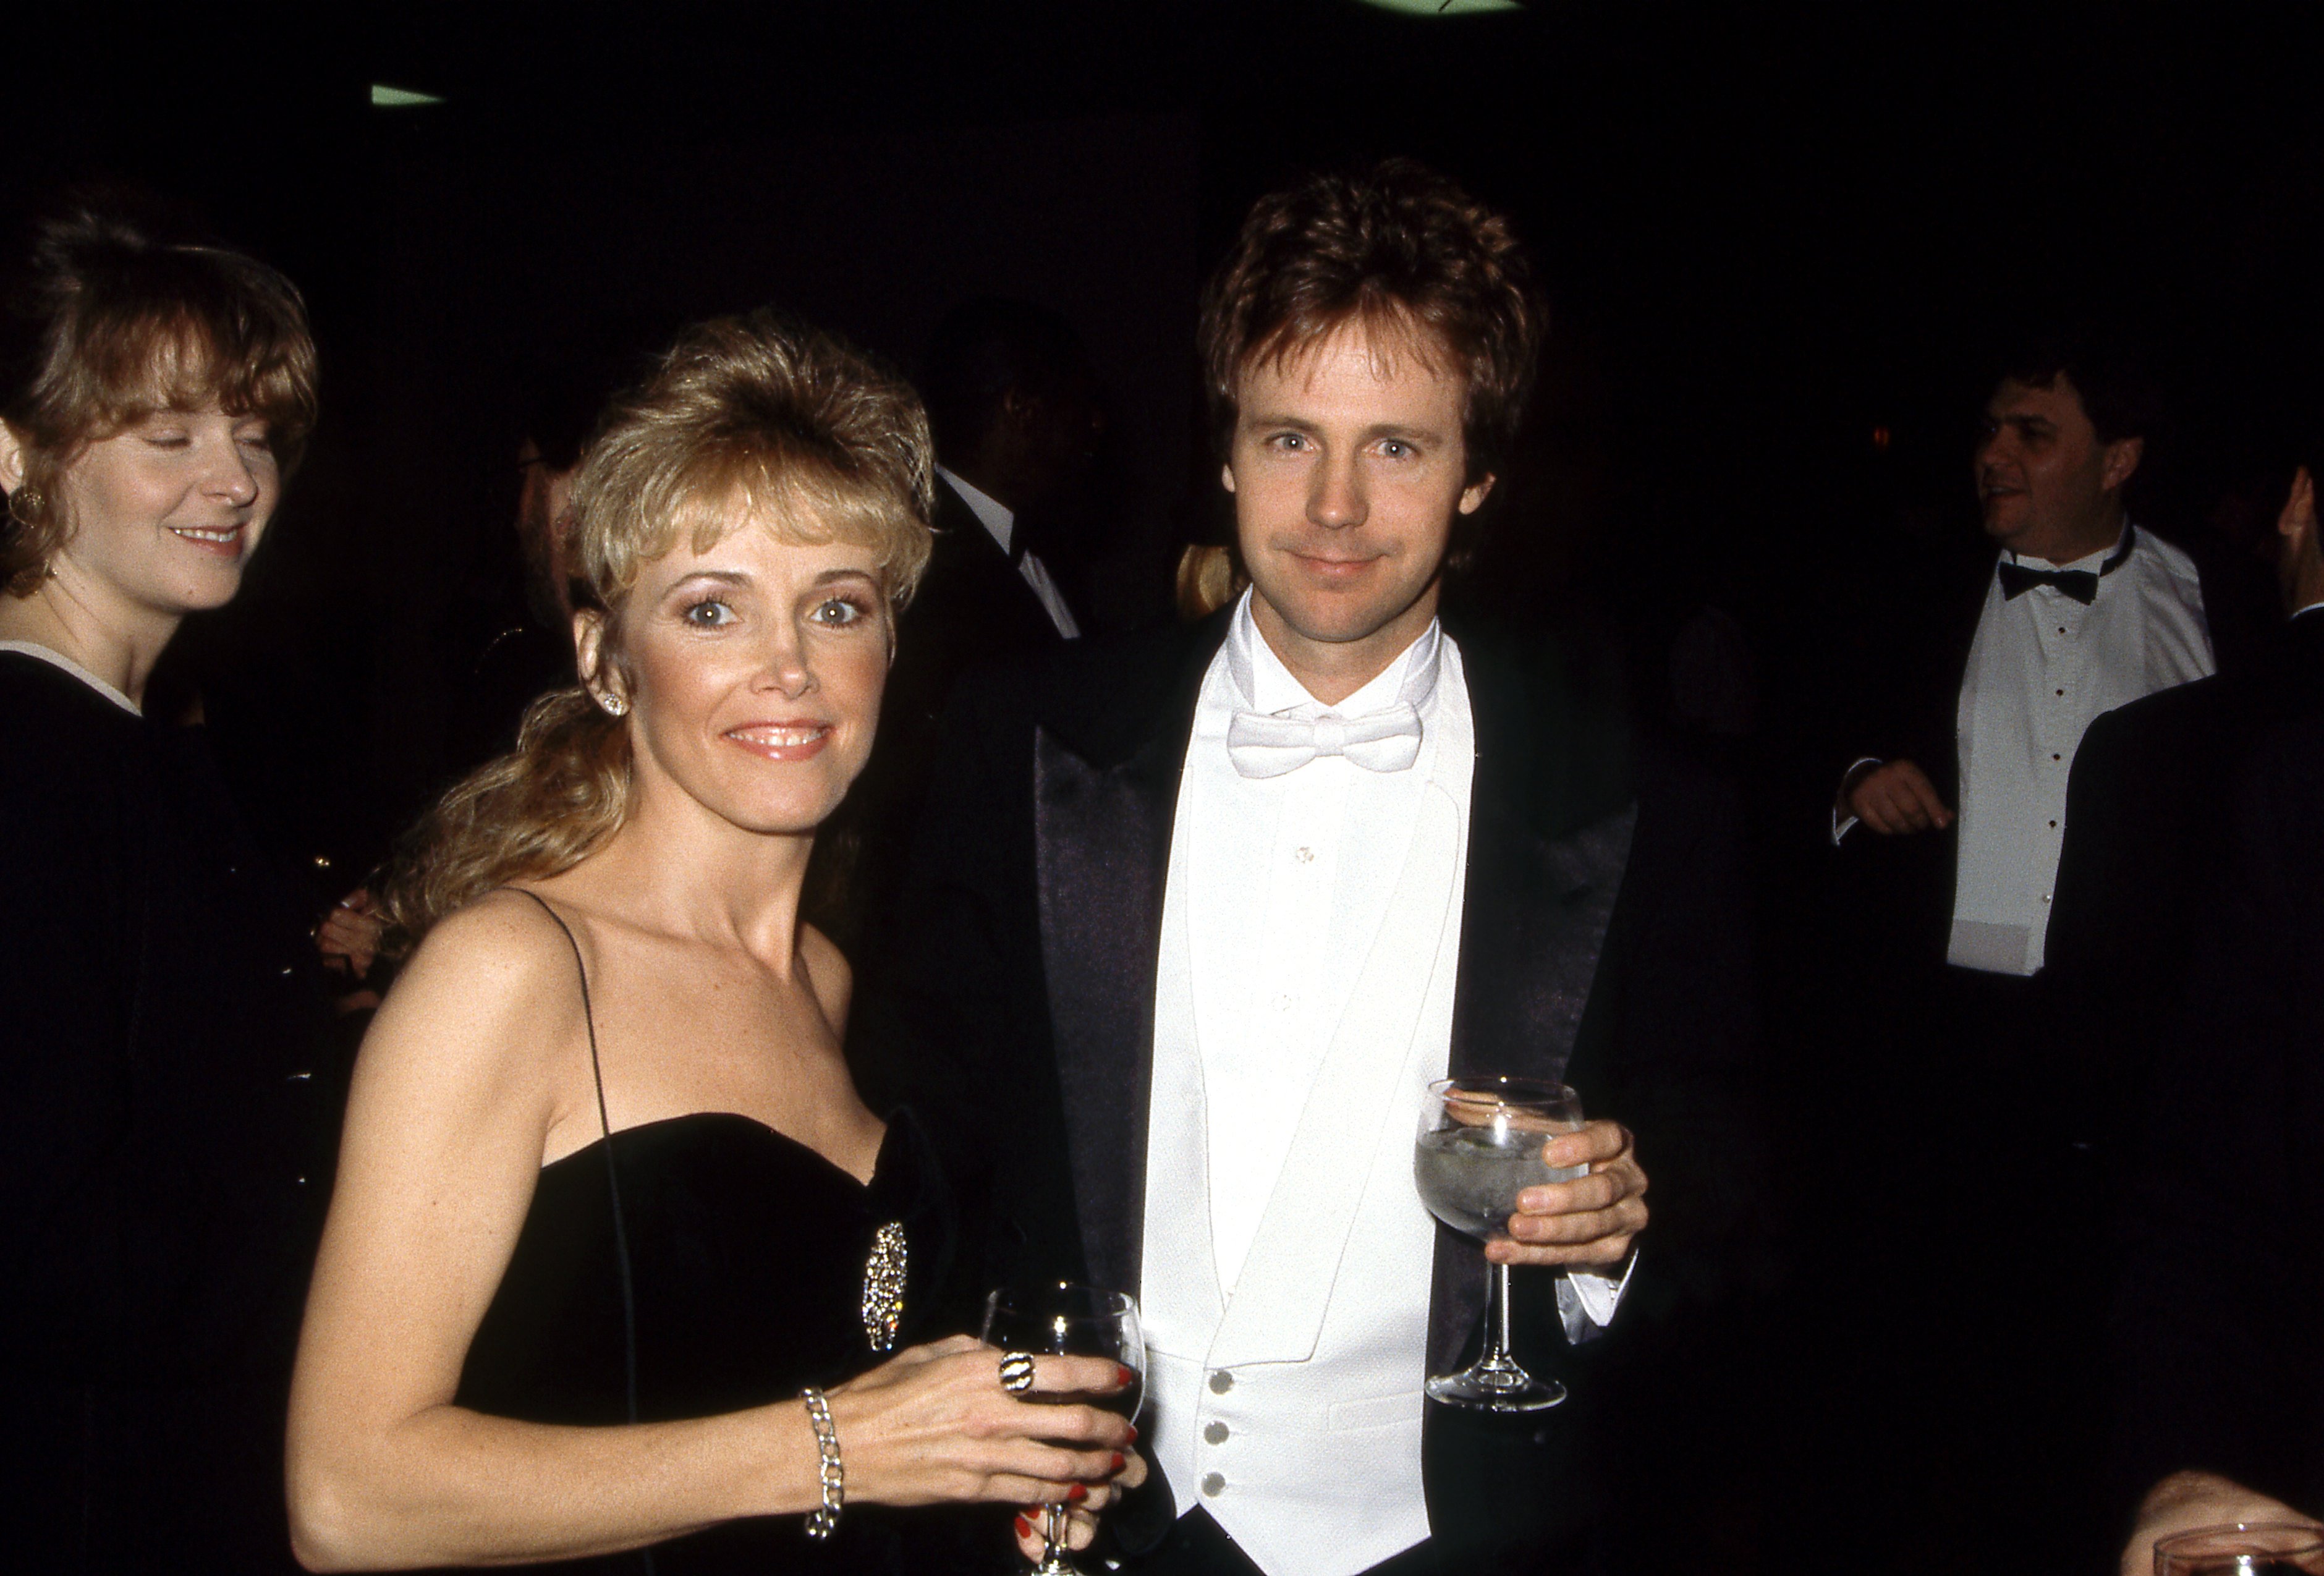 Paula Zwagerman Carvey and Dana Carvey at the 5th Annual American Comedy Awards, April 3, 1991. | Source: Getty Images